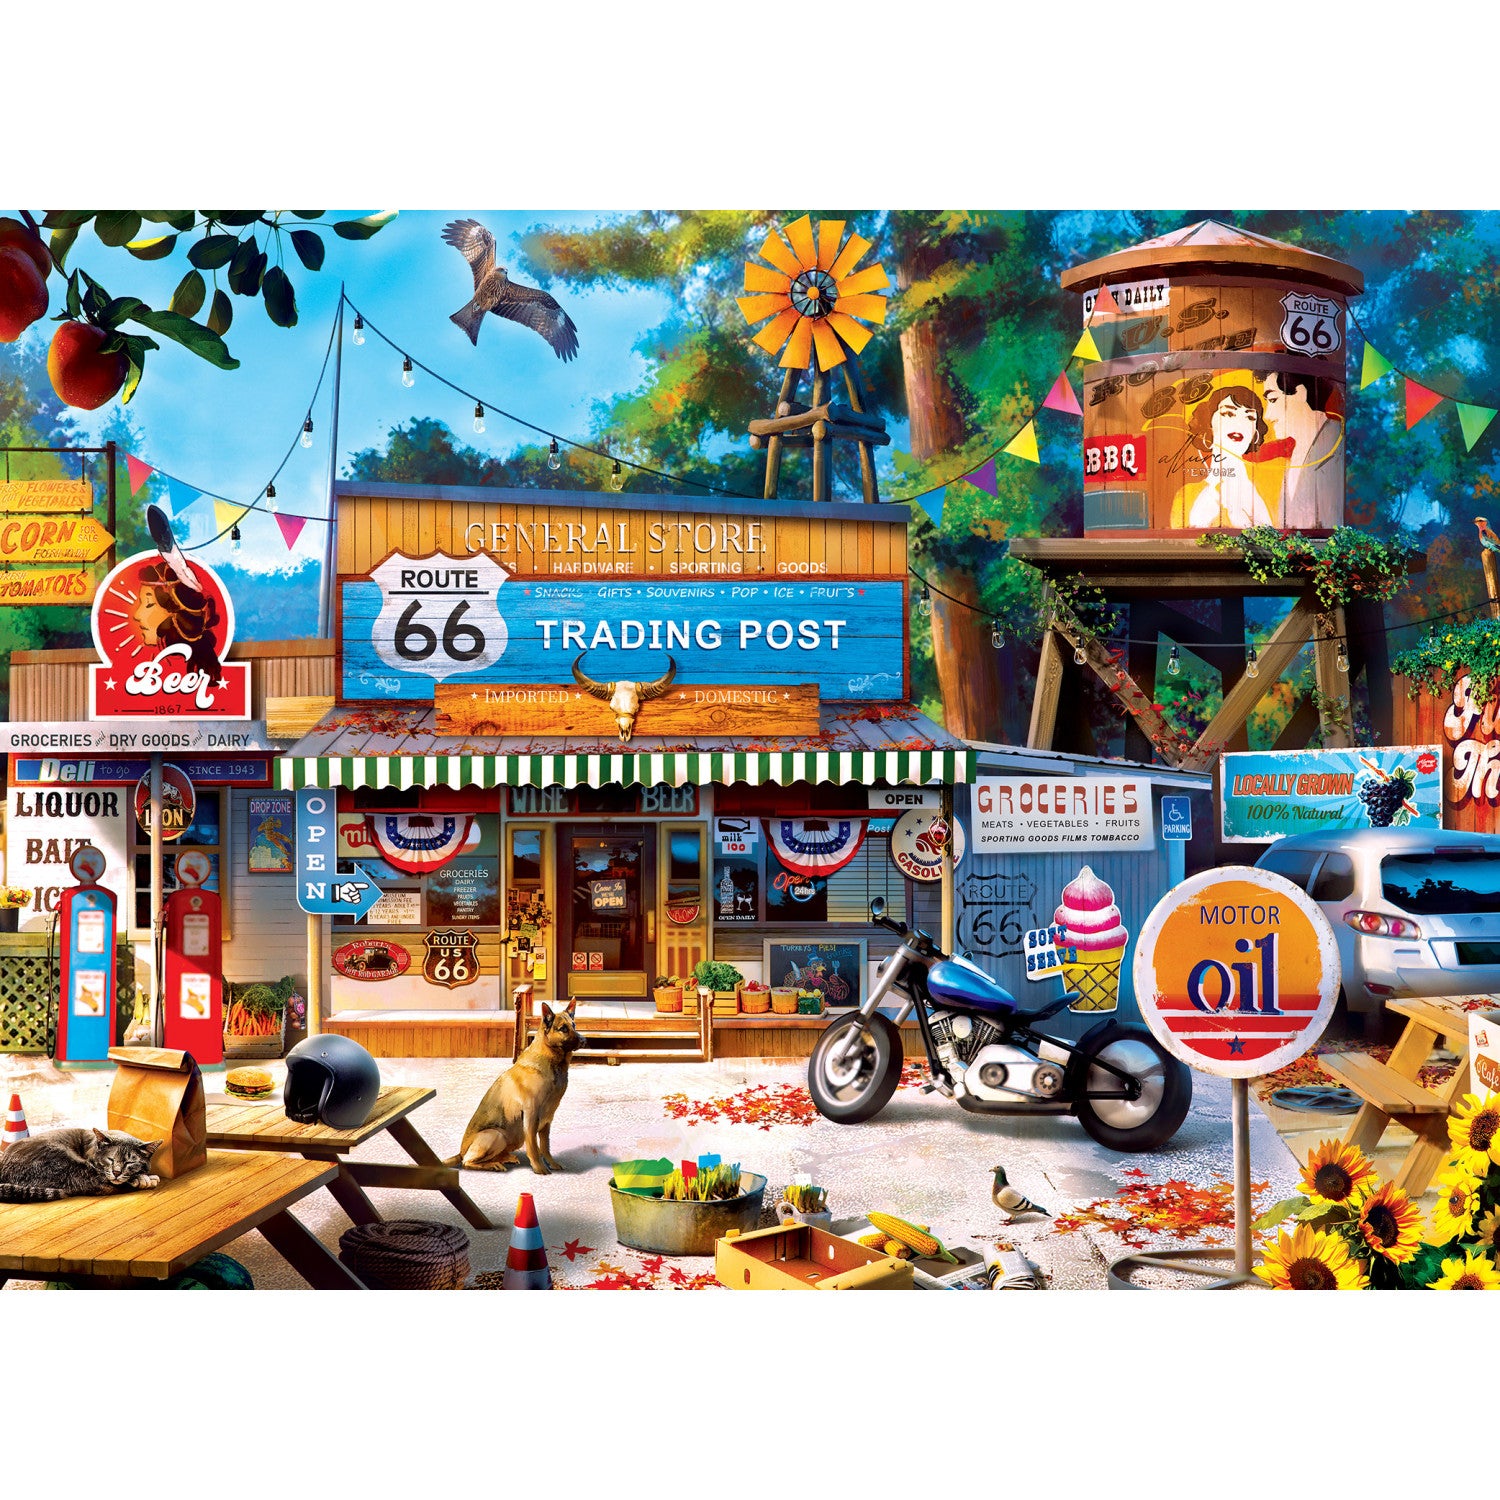 Cruisin' Rt 66 - Trading Post on Route 66 1000 Piece Puzzle